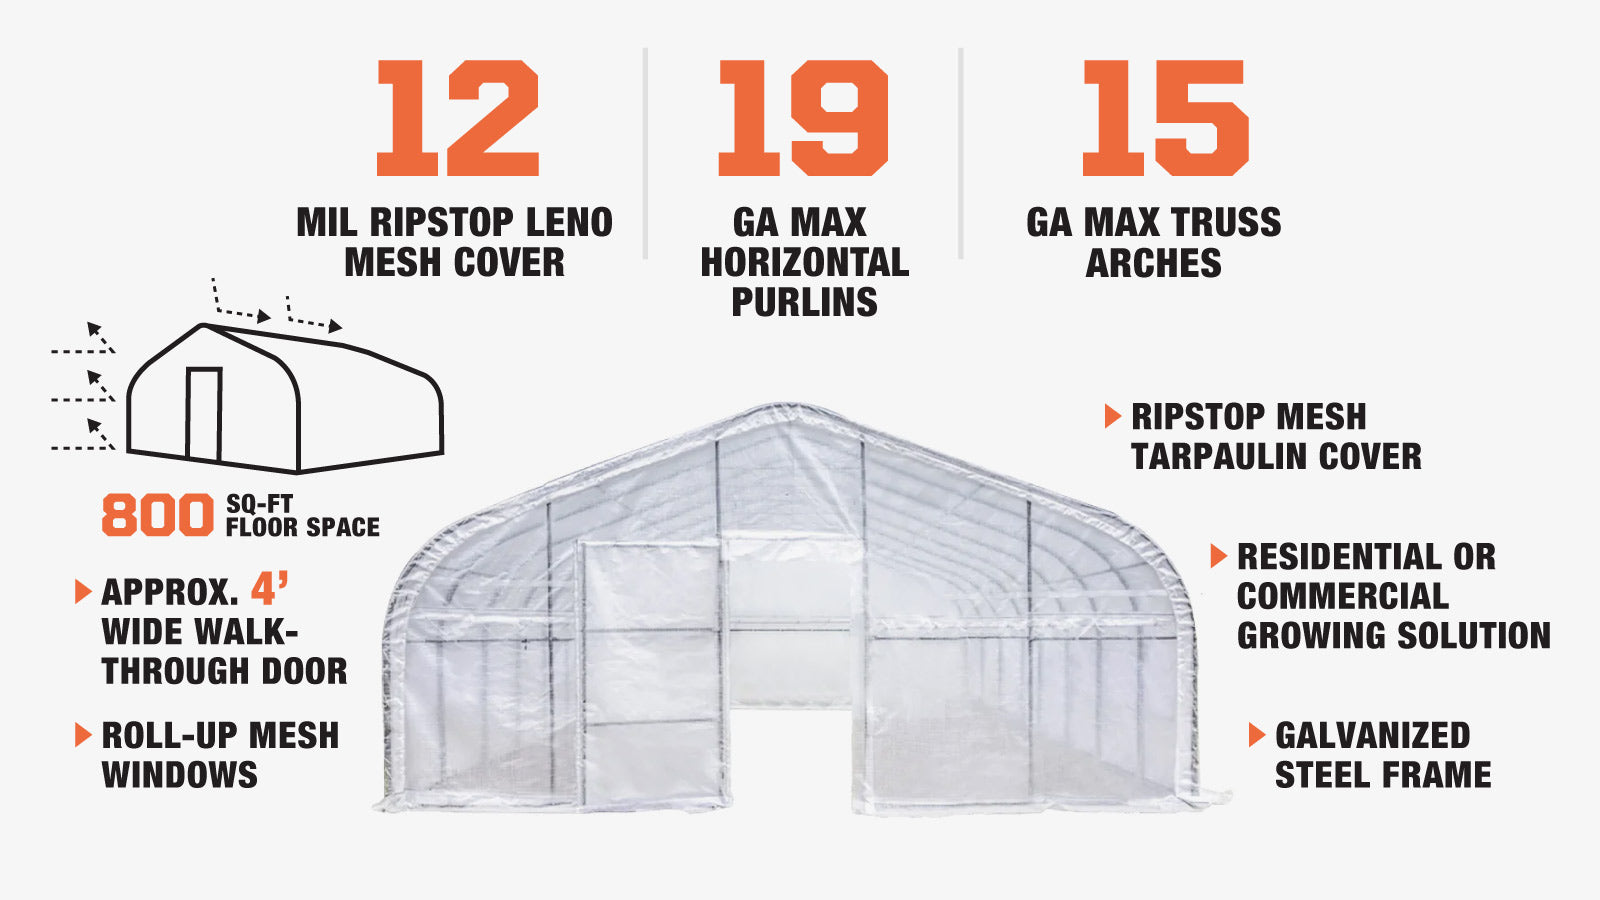 TMG Industrial 20’ x 40’ Tunnel Greenhouse Grow Tent w/12 Mil Ripstop Leno Mesh Cover, Cold Frame, Roll-up Windows, Peak Ceiling Roof, TMG-GH2040-description-image